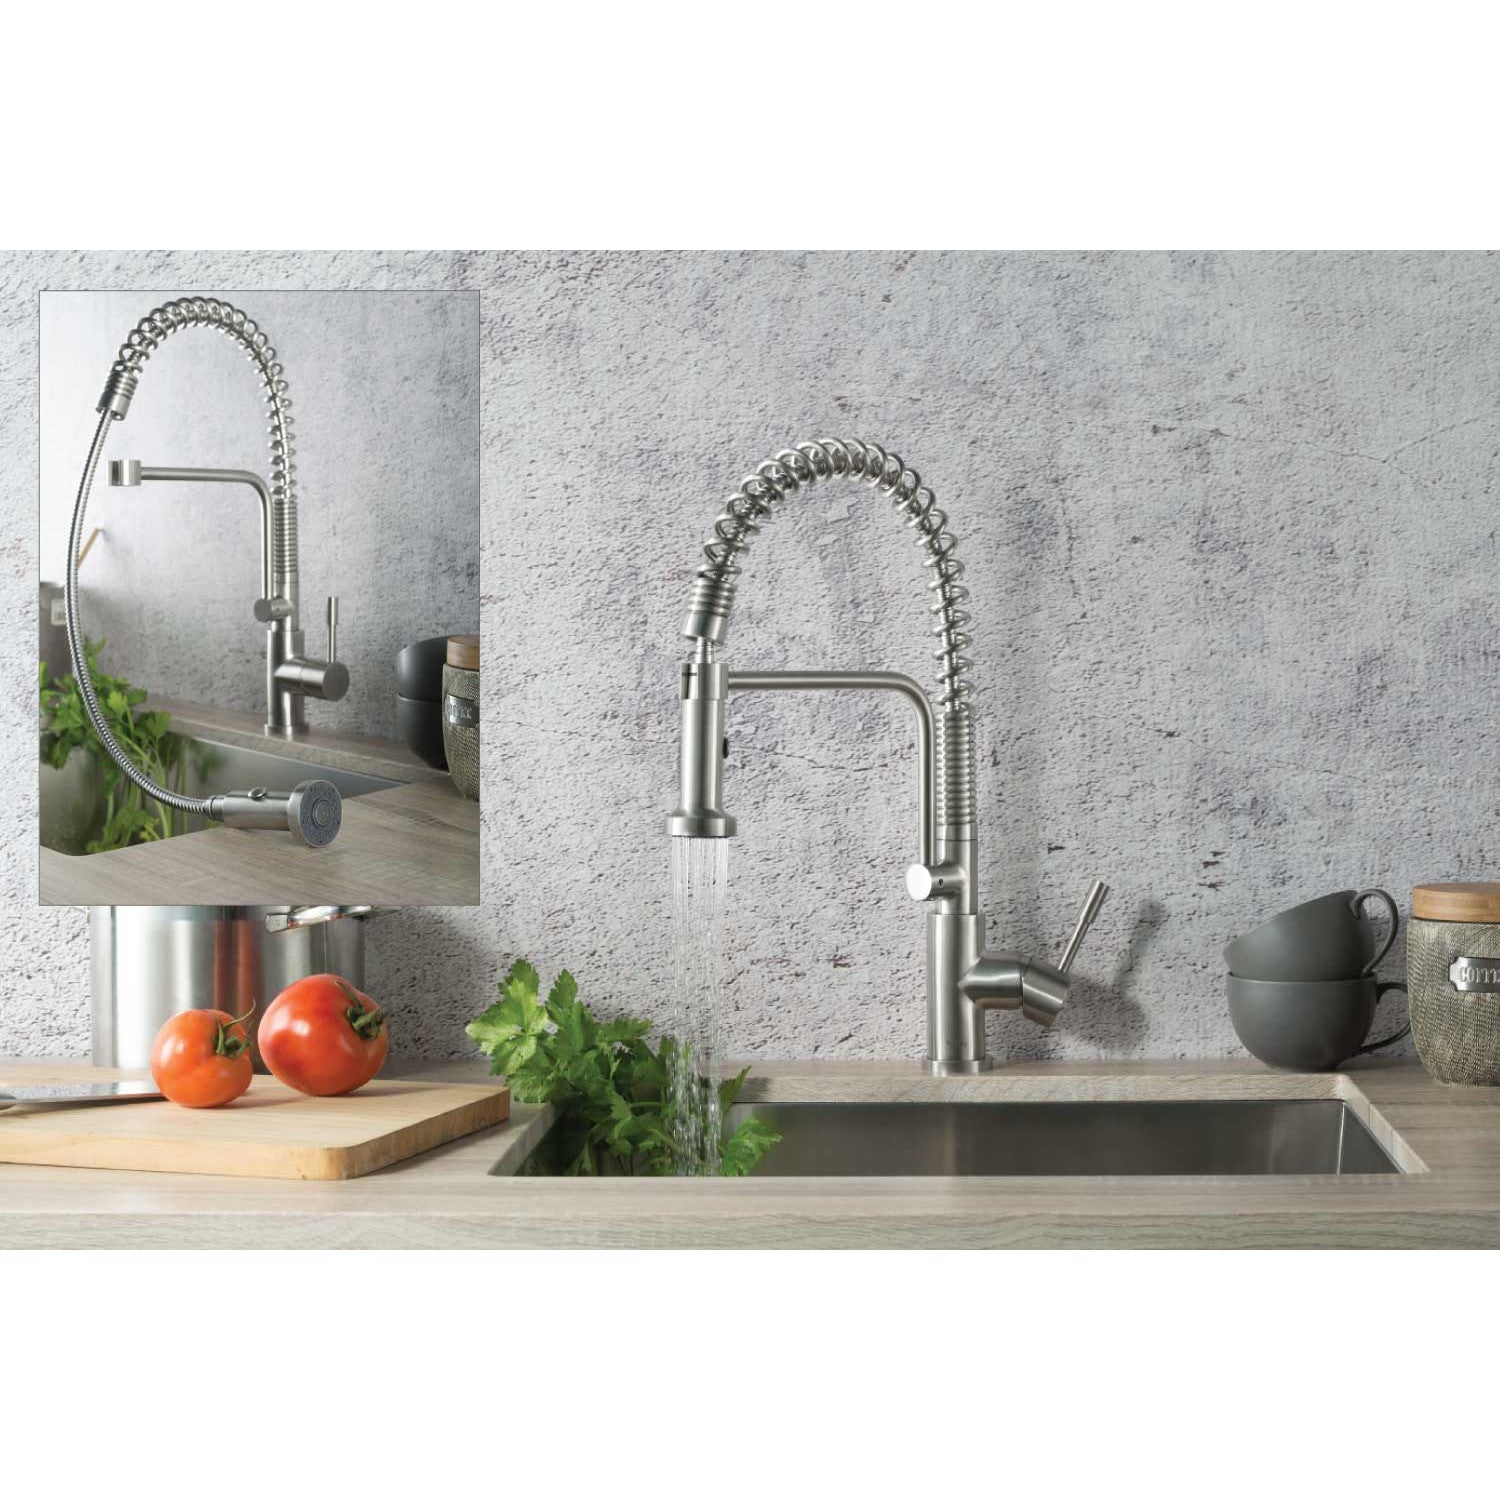 Isenberg Klassiker Caso 19" Single Hole Vortex Brown Semi-Professional Stainless Steel Pull-Down Kitchen Faucet With Dual Function Sprayer